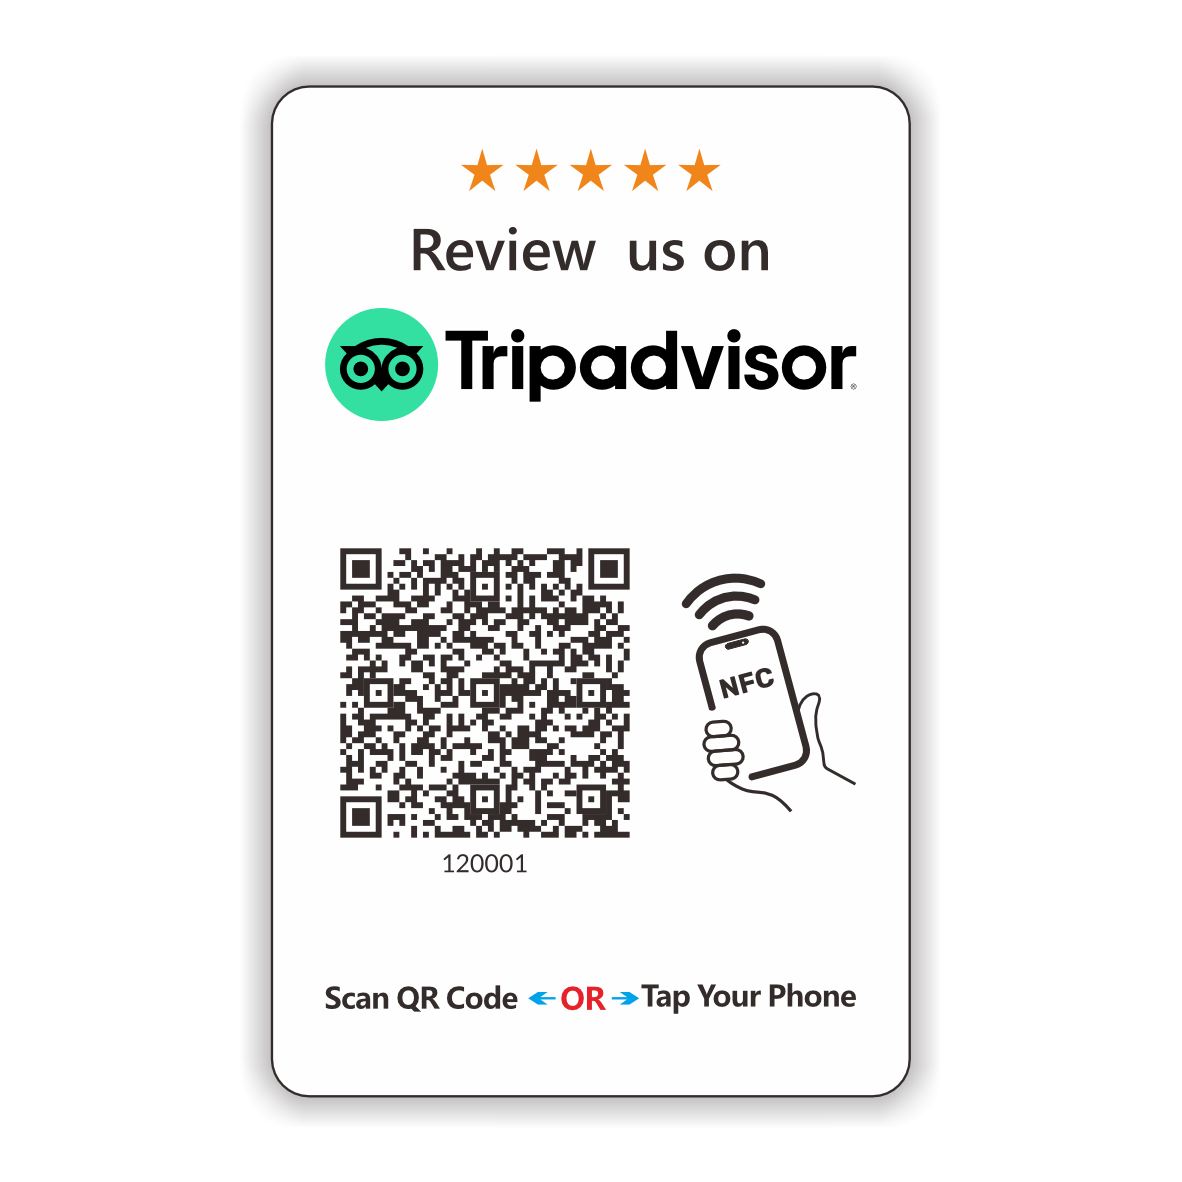 Review Us on Tripadvisor Card Touchless Card Reusable QR Code NFC Tap Review Card